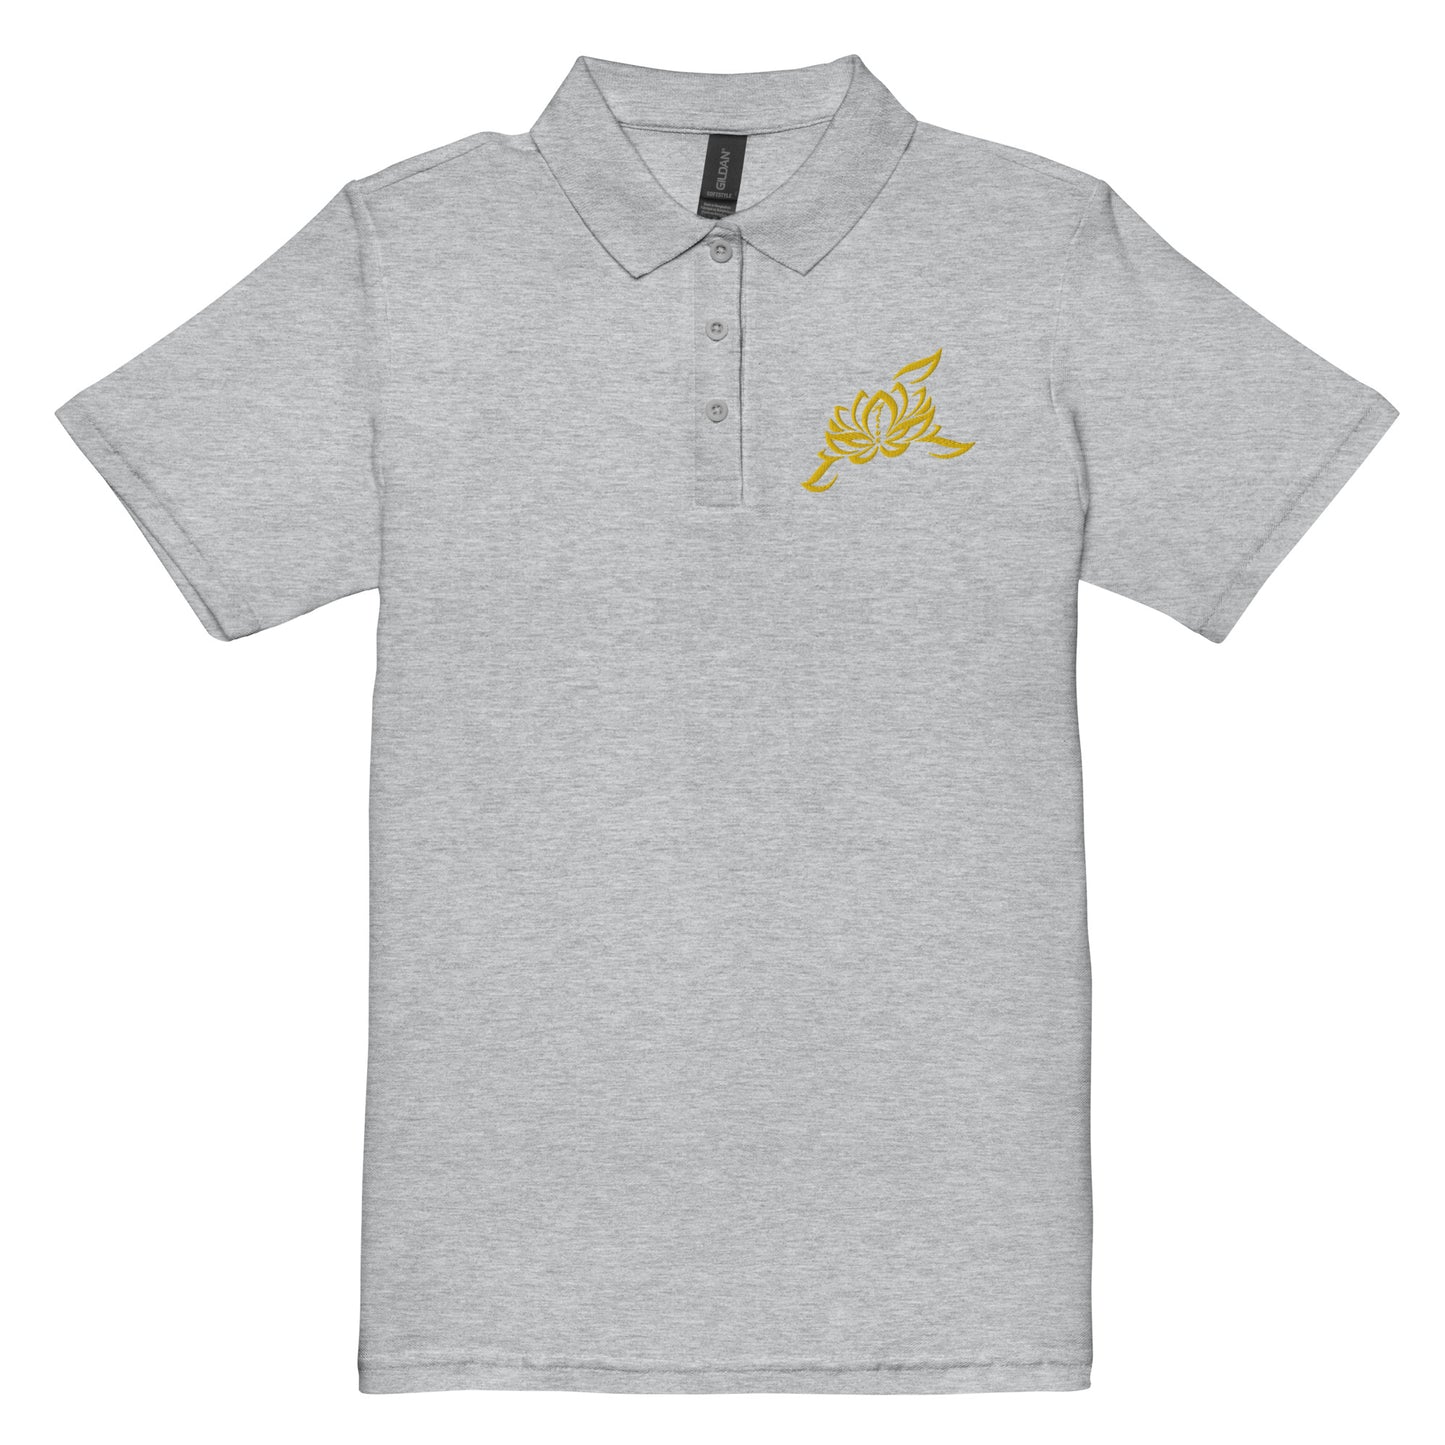 Alive Embroidered Women’s pique polo shirt